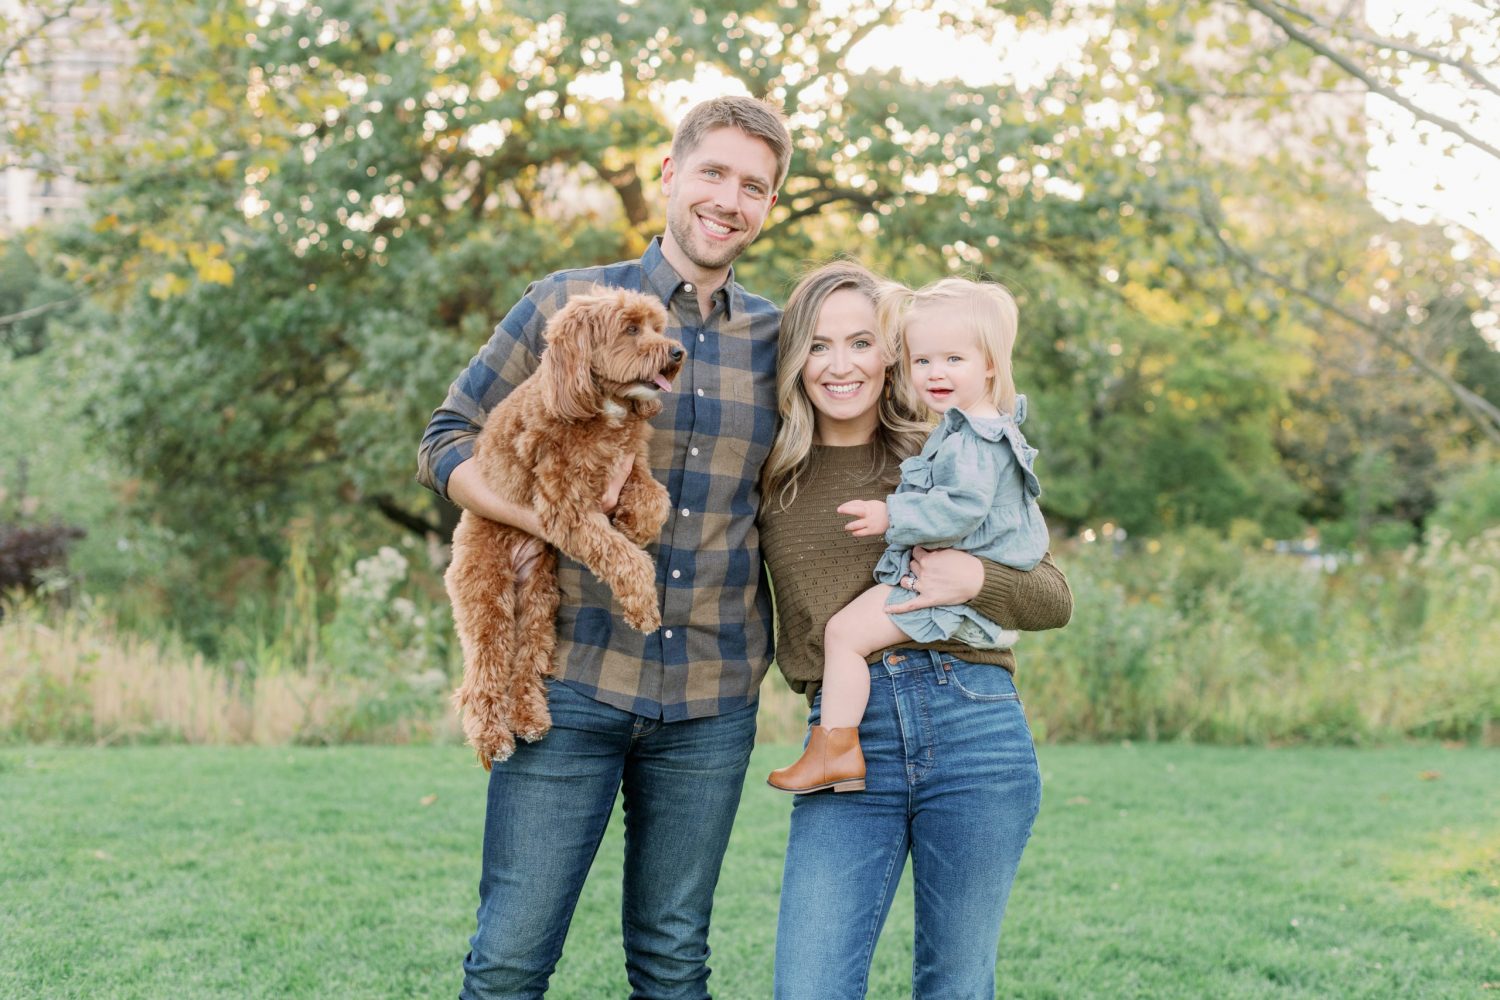 Dog Friendly Photo Locations in Chicago Suburbs - Where to Take Family Photos with your Dog